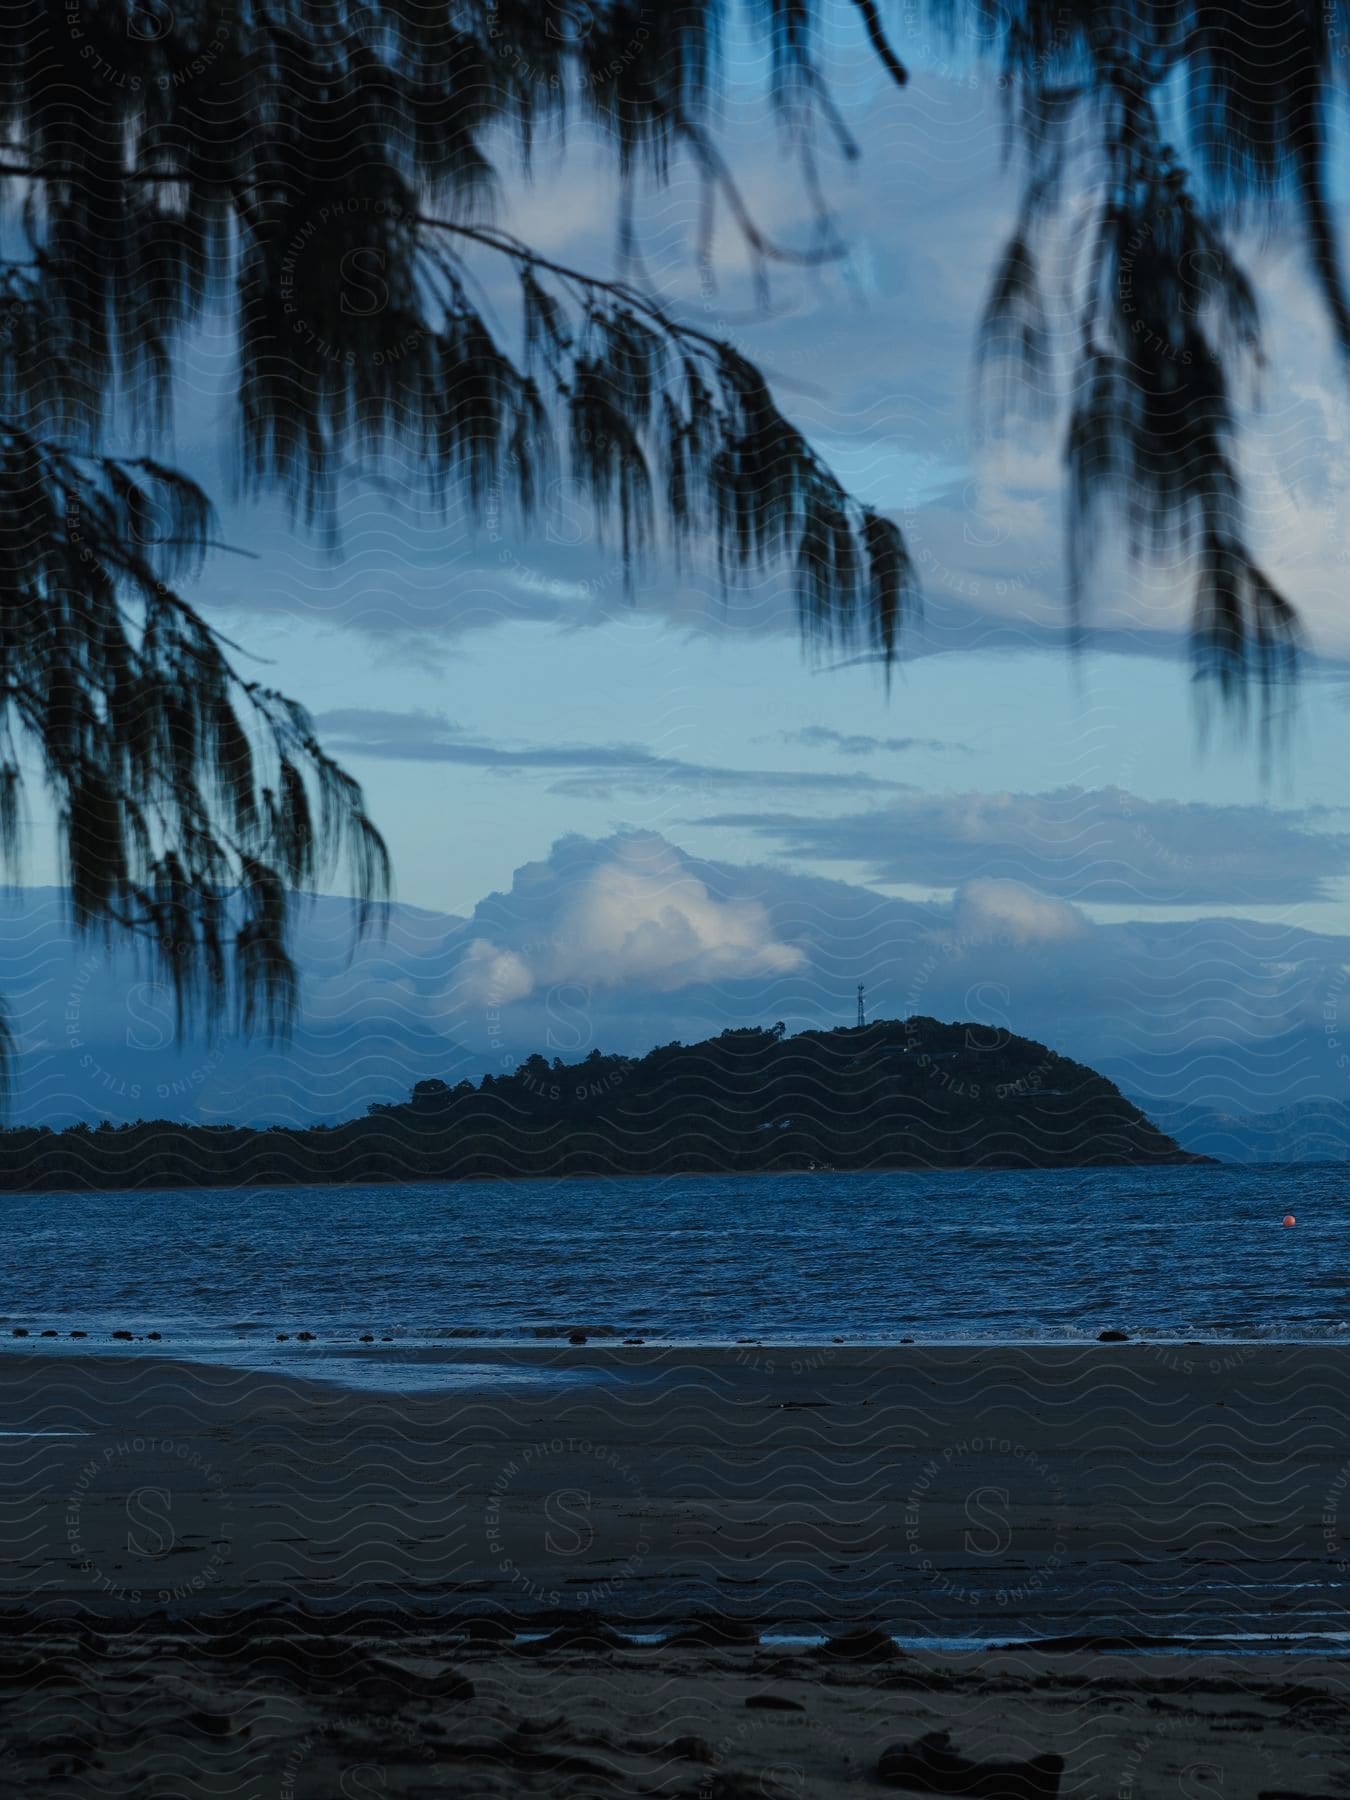 A beach at dusk with a tree-covered island in the distance and leaves from a foreground tree littering the dark sand.